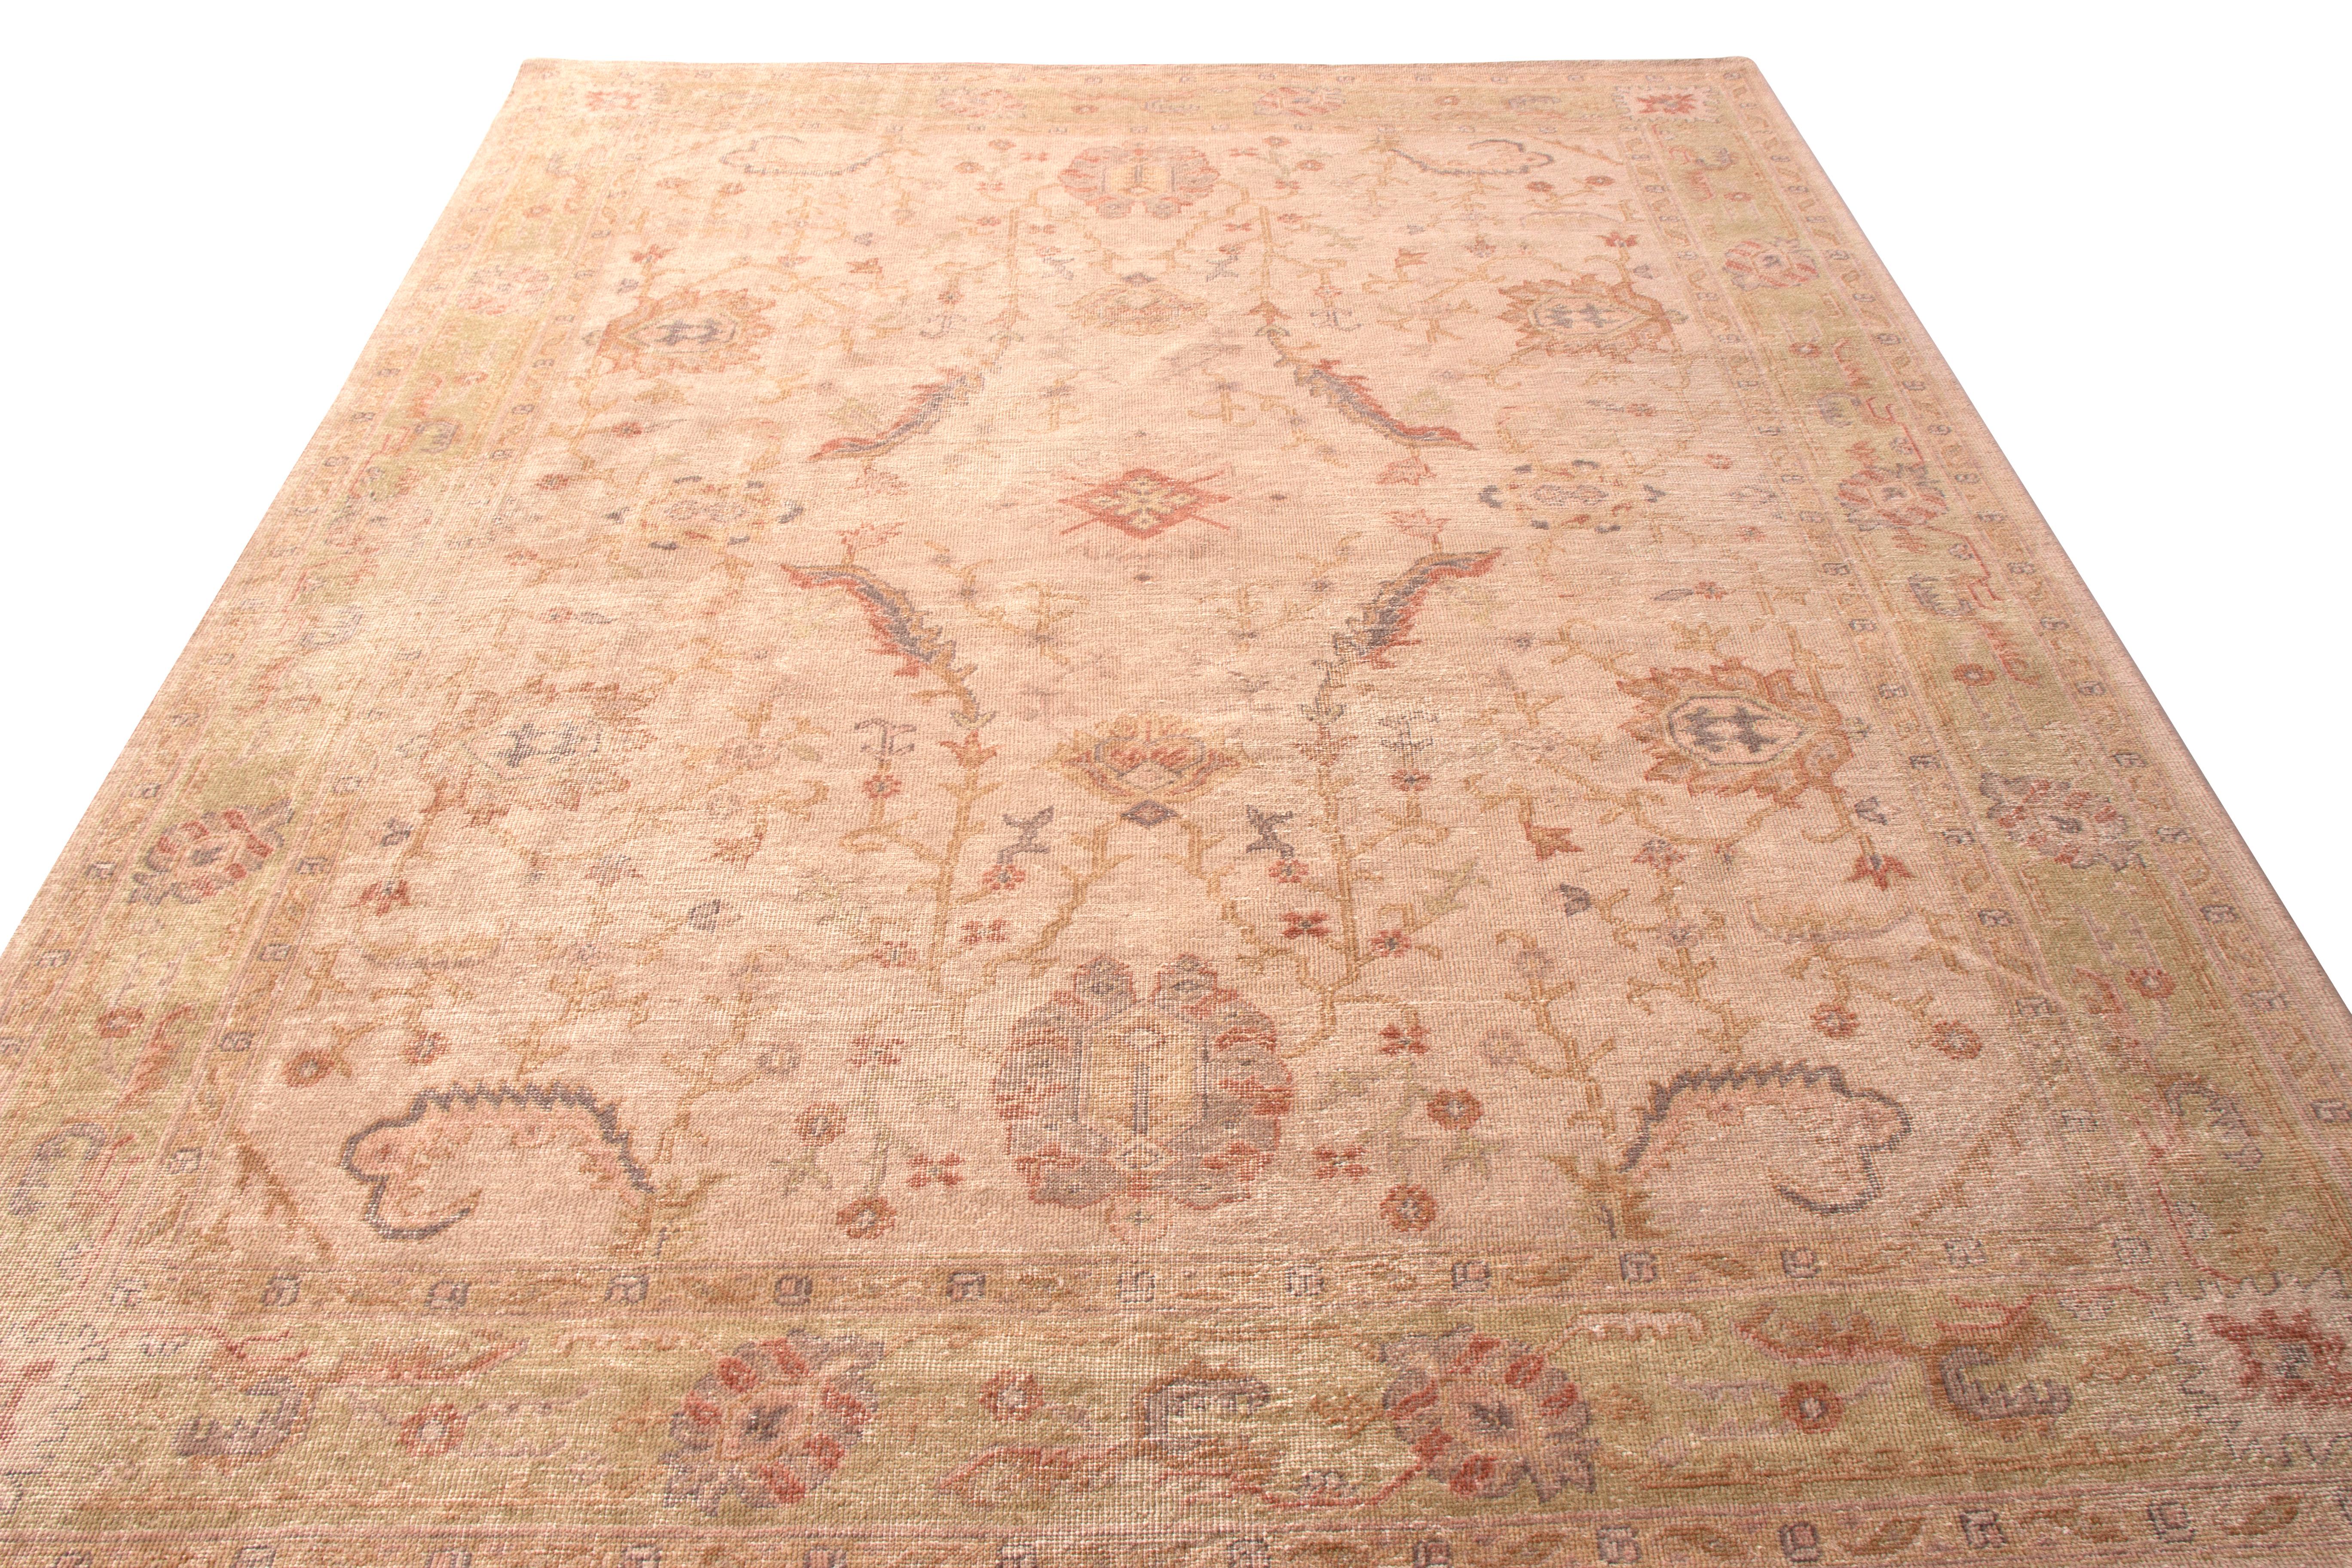 Rustic Hand Knotted Distressed Floral Rug Beige Pink Classic Pattern by Rug & Kilim